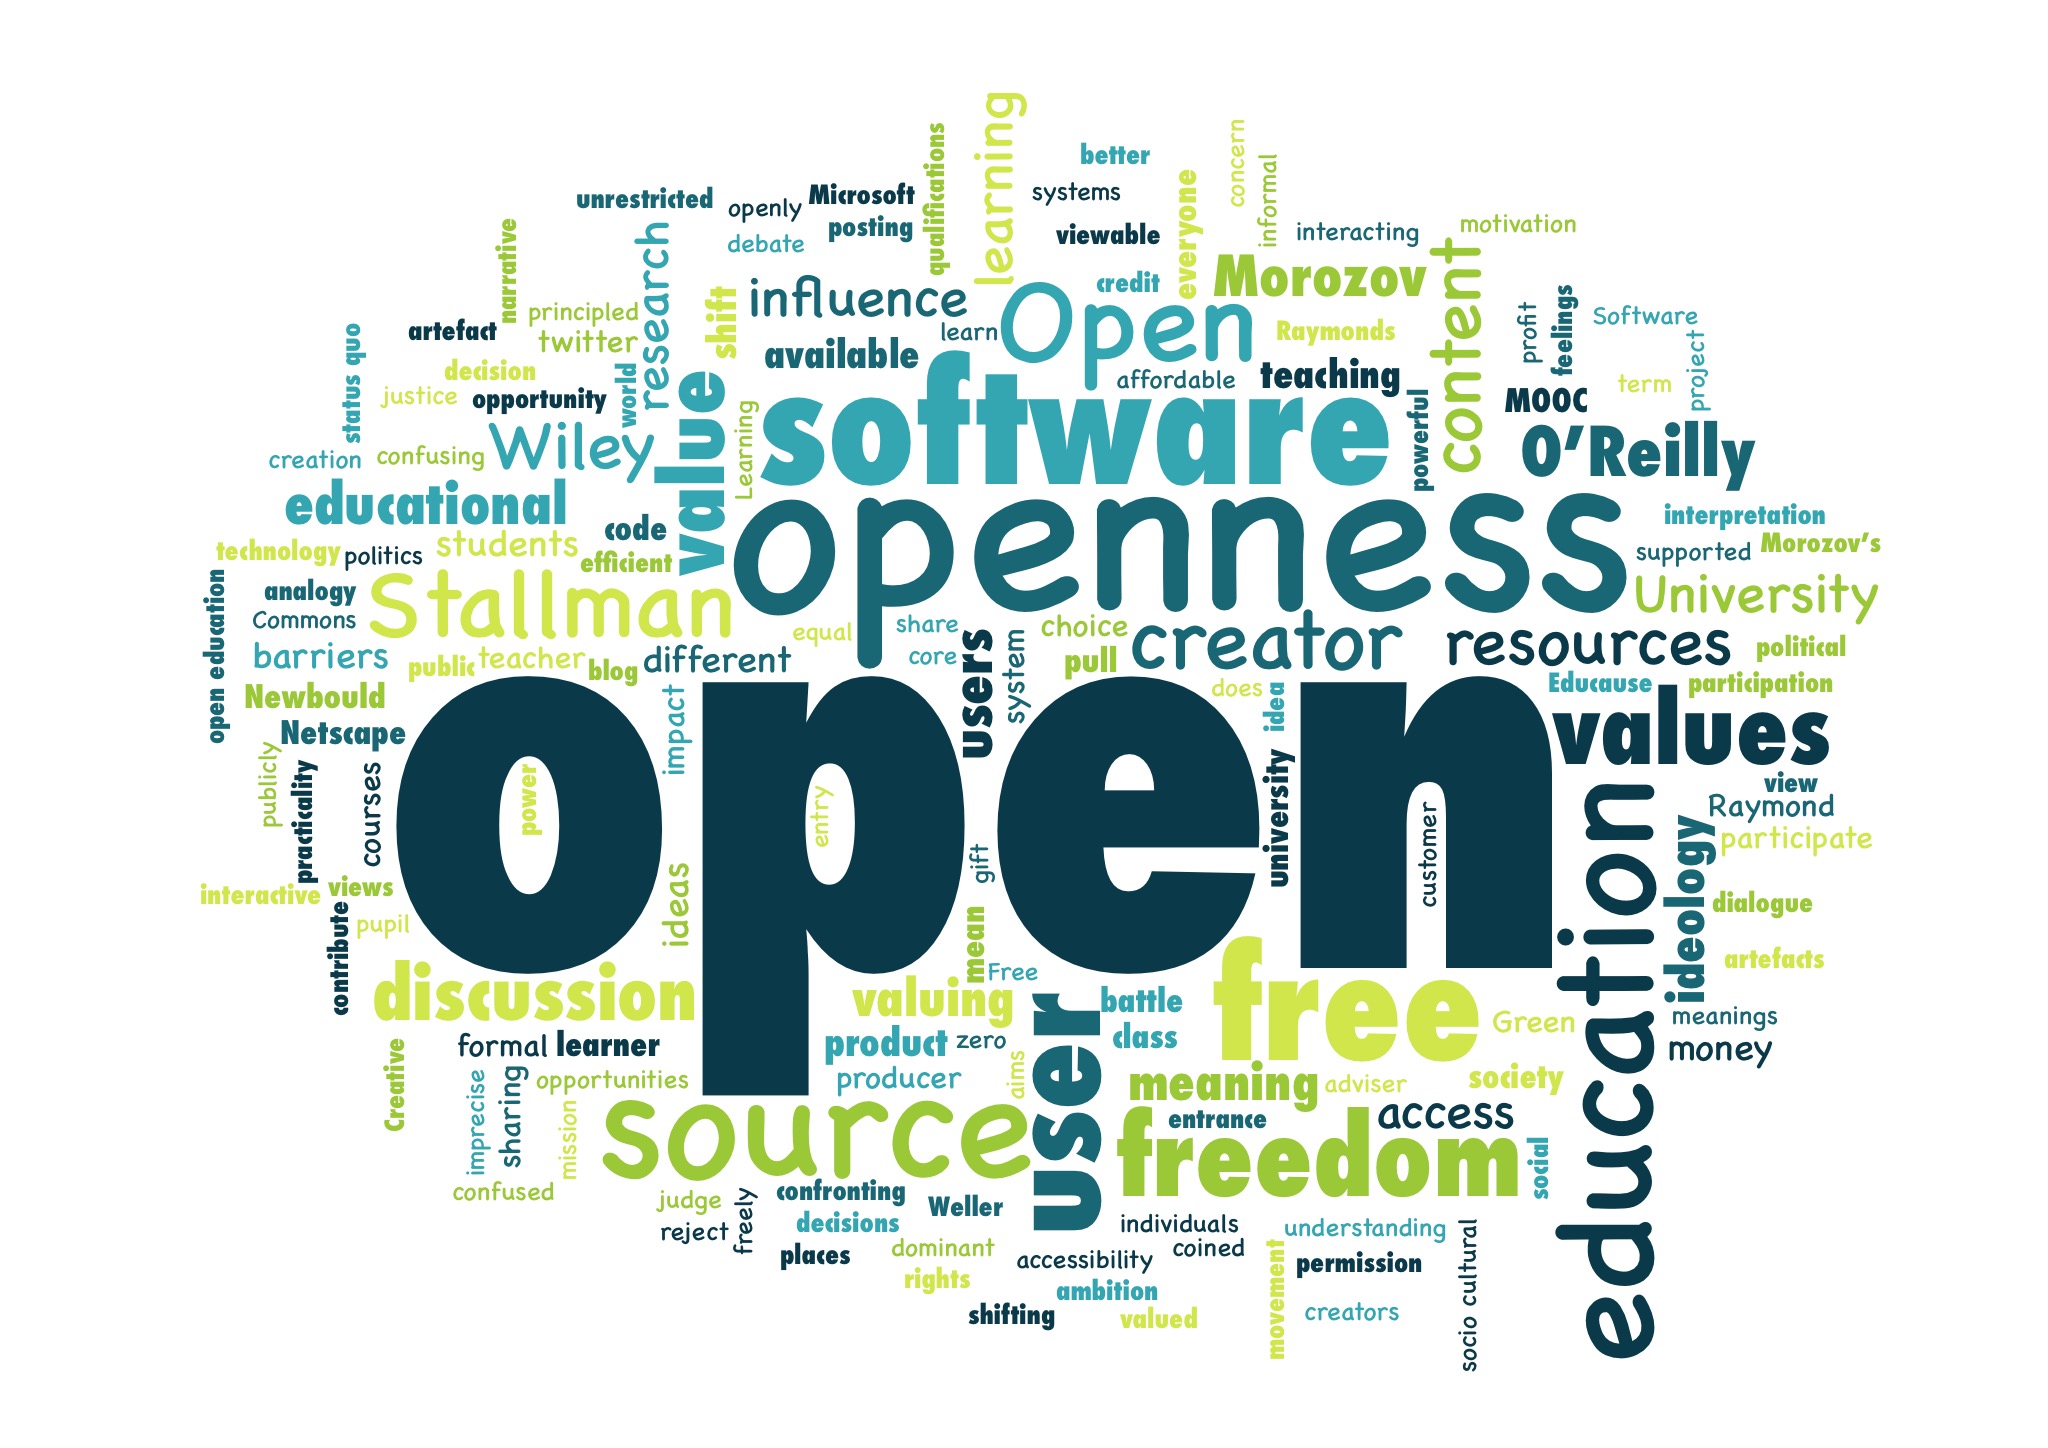 Word cloud on openness